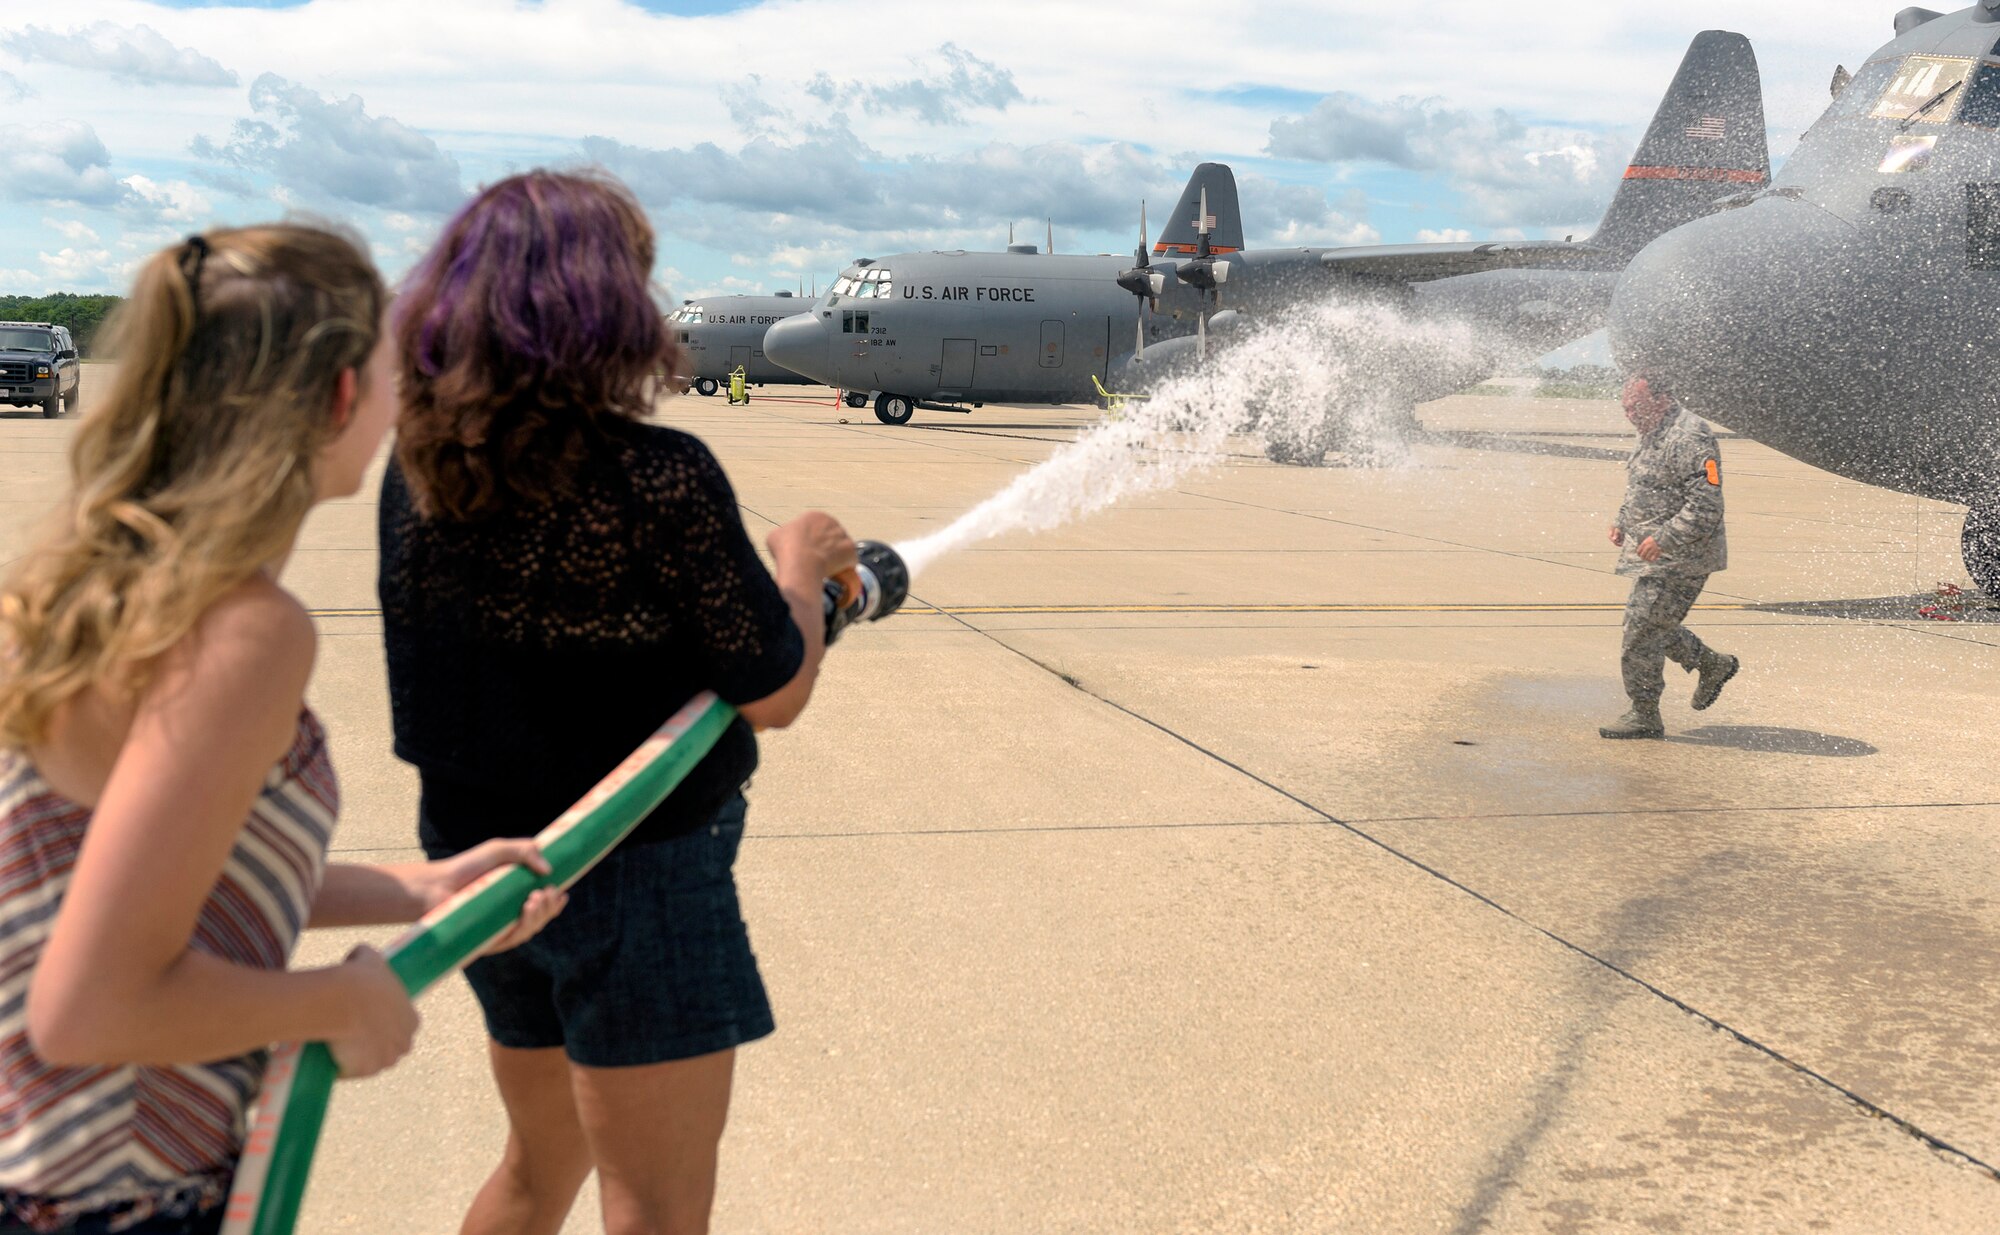 U.S. Air Force Col. Barton Welker, the commander of the 182nd Maintenance Group, Illinois Air National Guard, is doused with water by his spouse after his “fini flight” at the 182nd Airlift Wing in Peoria, Ill., July 25, 2016. Welker is scheduled to retire Aug. 1 after 34 years of military service. (U.S. Air National Guard photo by Staff Sgt. Lealan Buehrer)